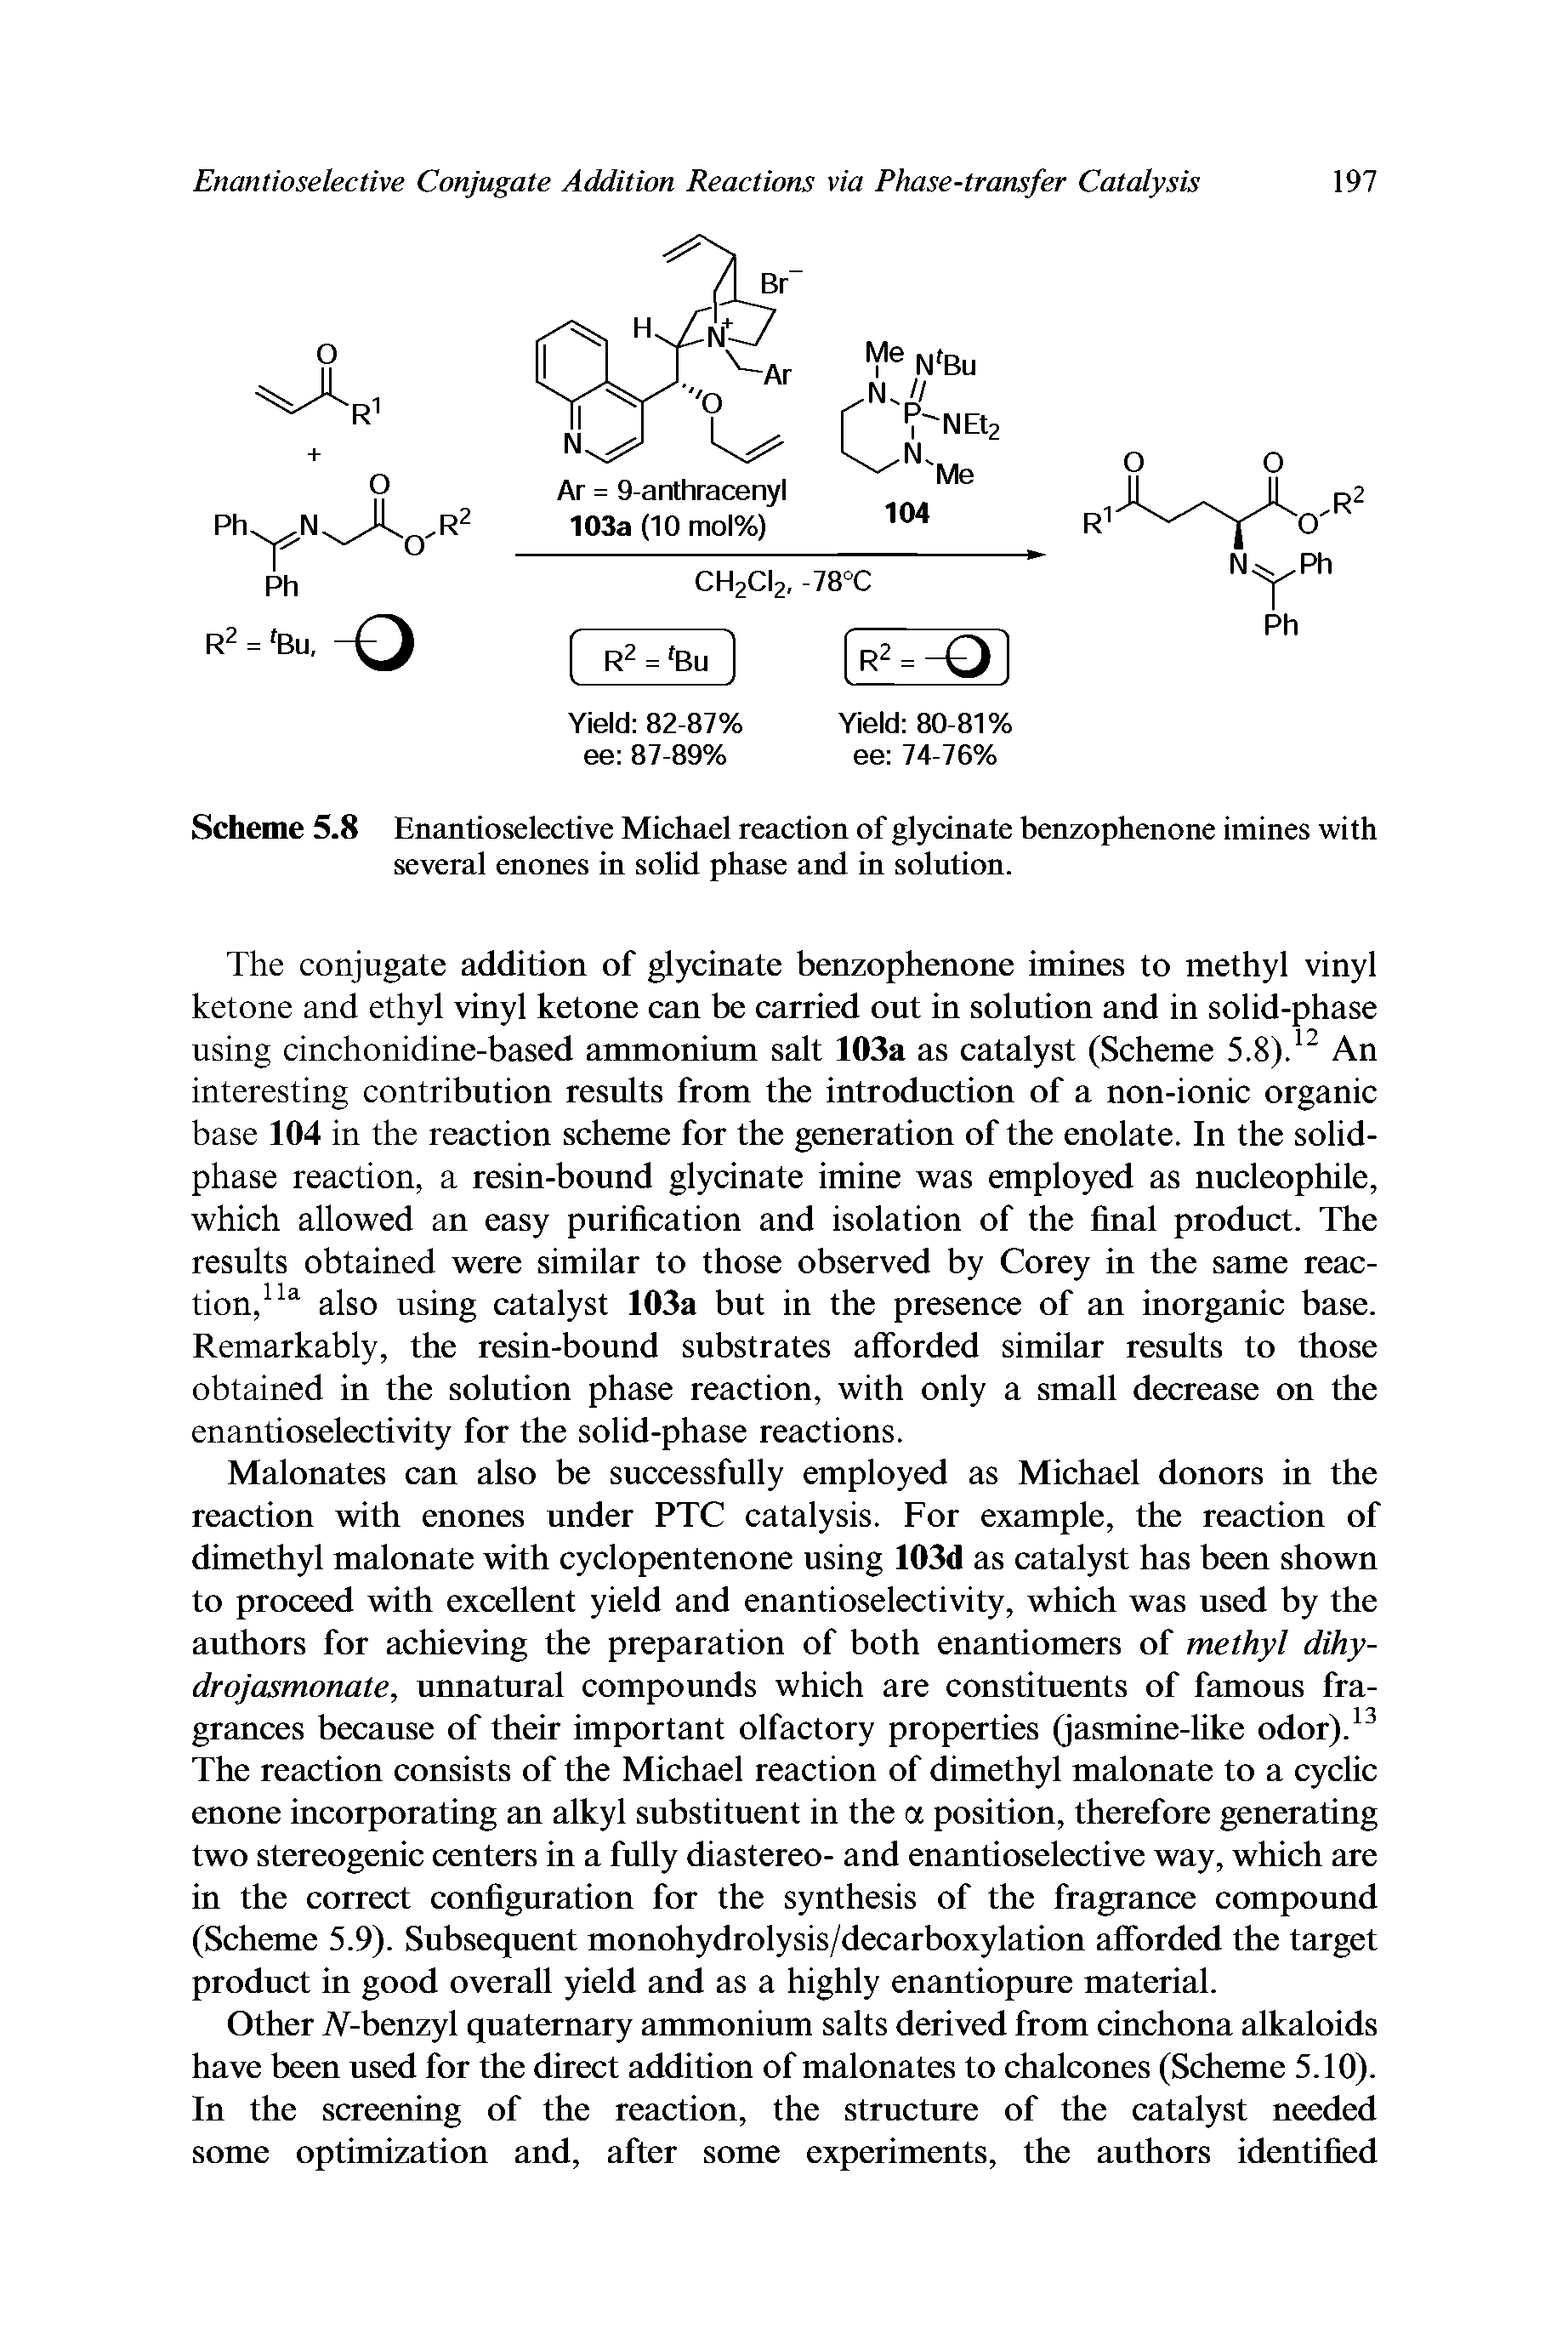 Scheme 5.8 Enantioselective Michael reaction of glycinate benzophenone imines with several enones in solid phase and in solution.